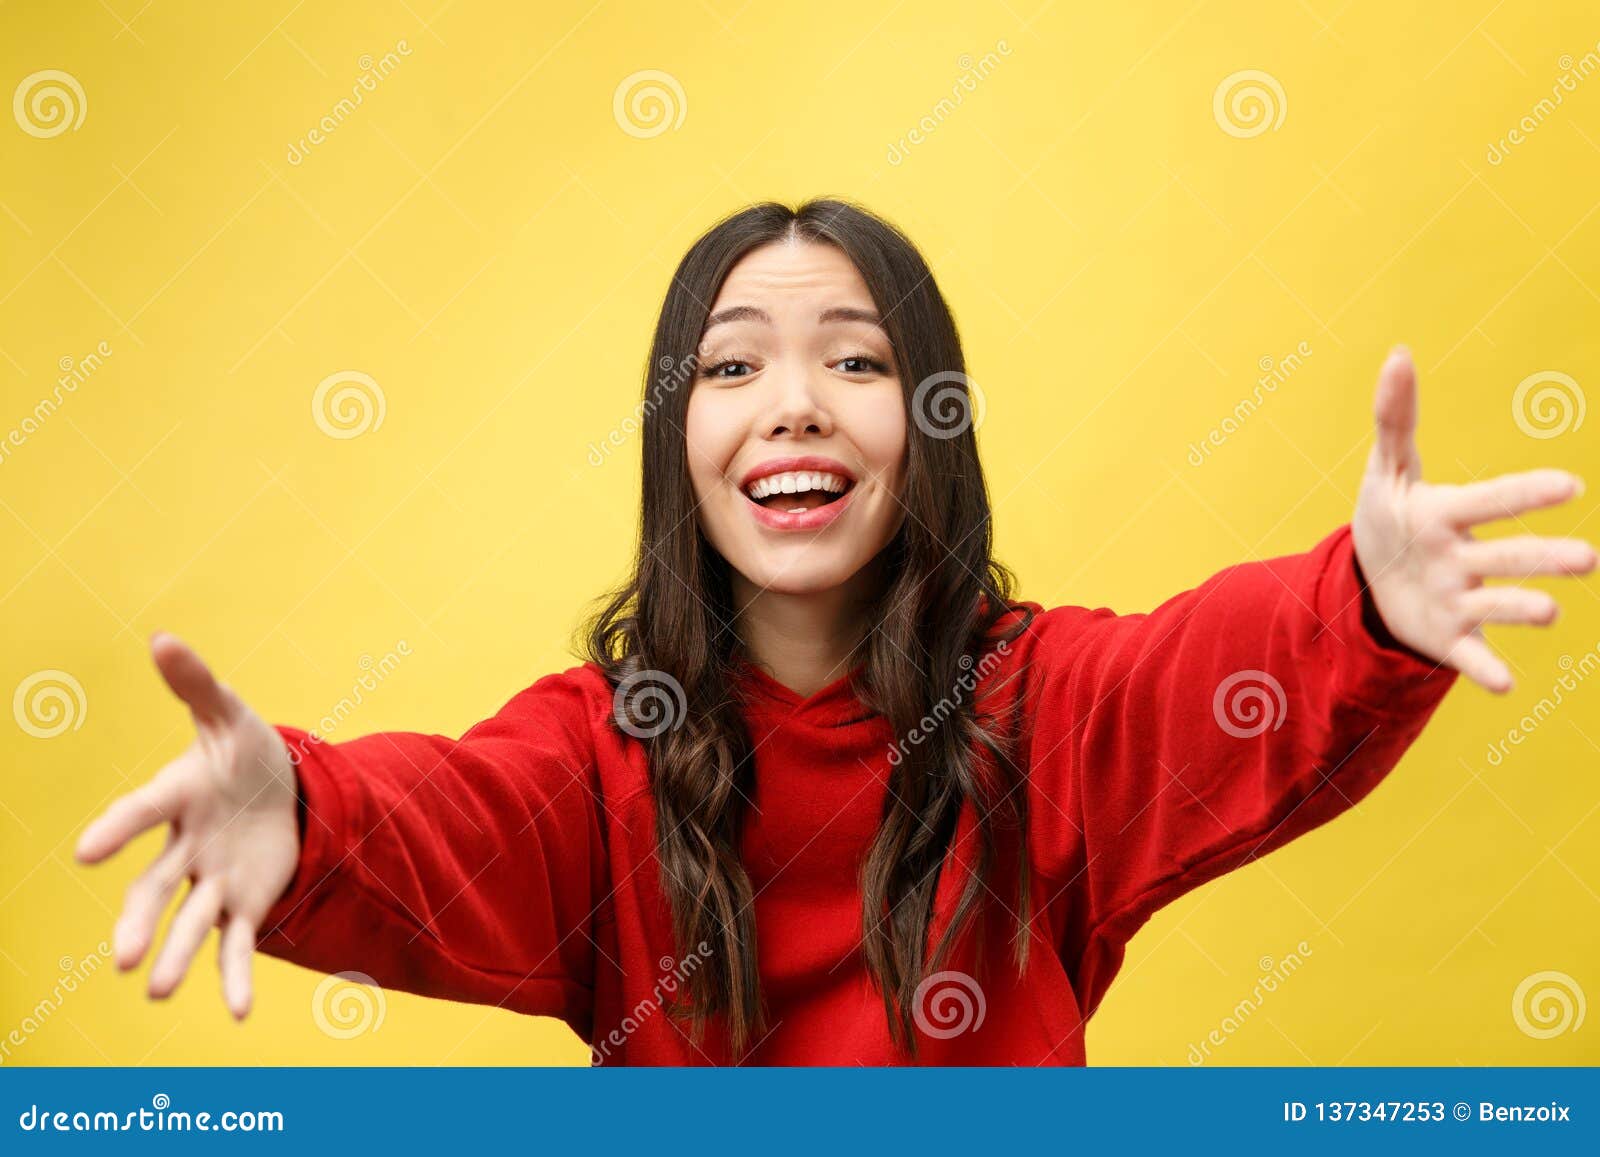 Portrait Happy Asian Girl Is Surprised She Is Excitedyellow Background 